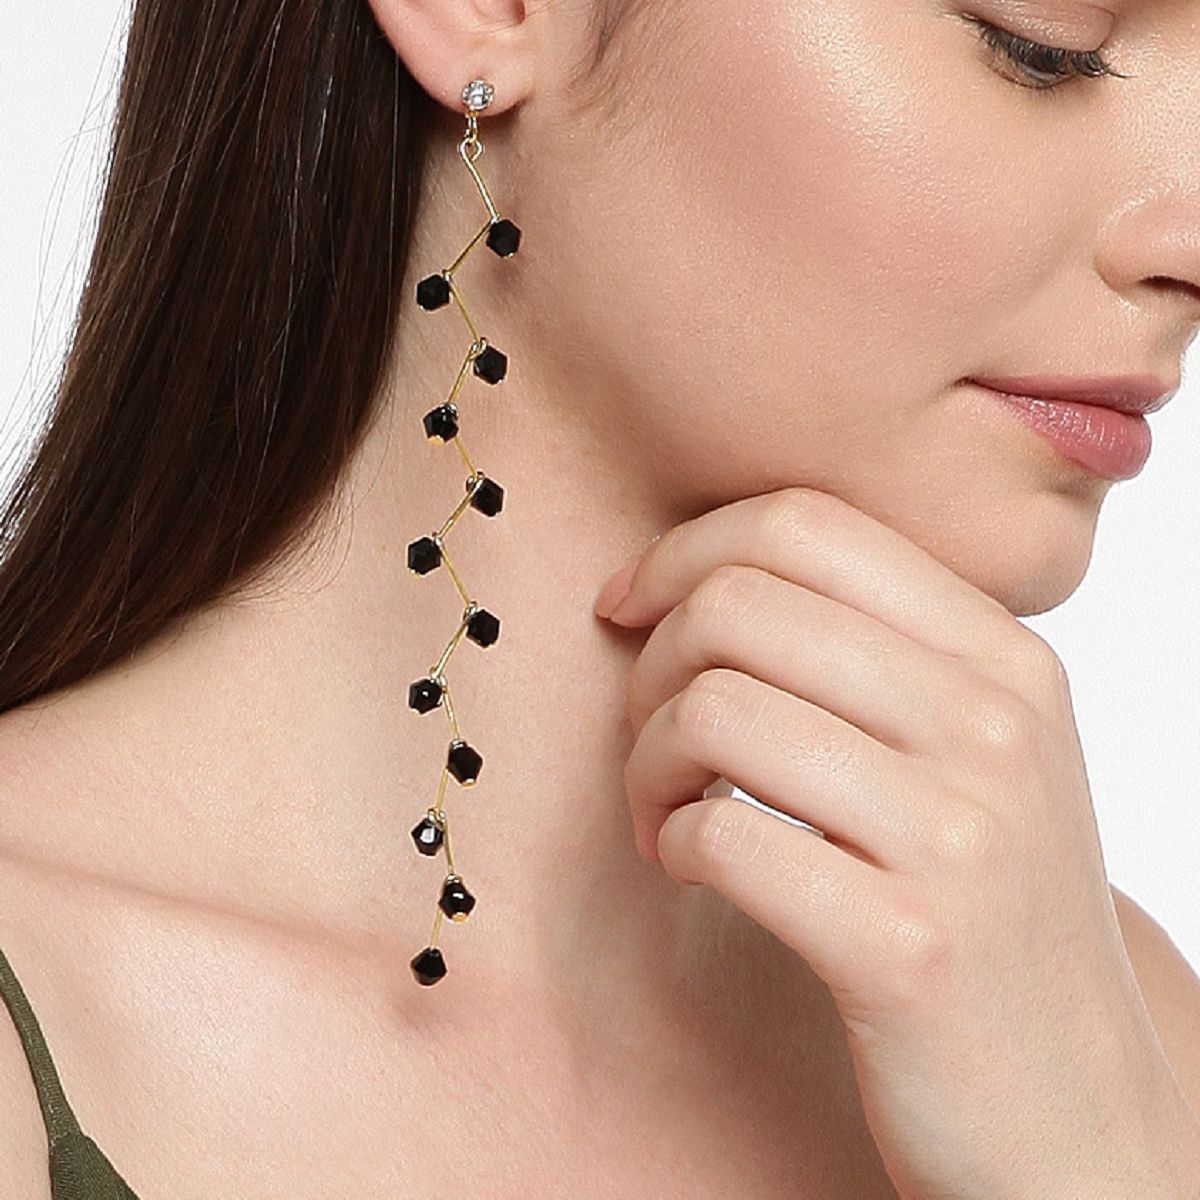 Share more than 81 black pearl drop earrings latest